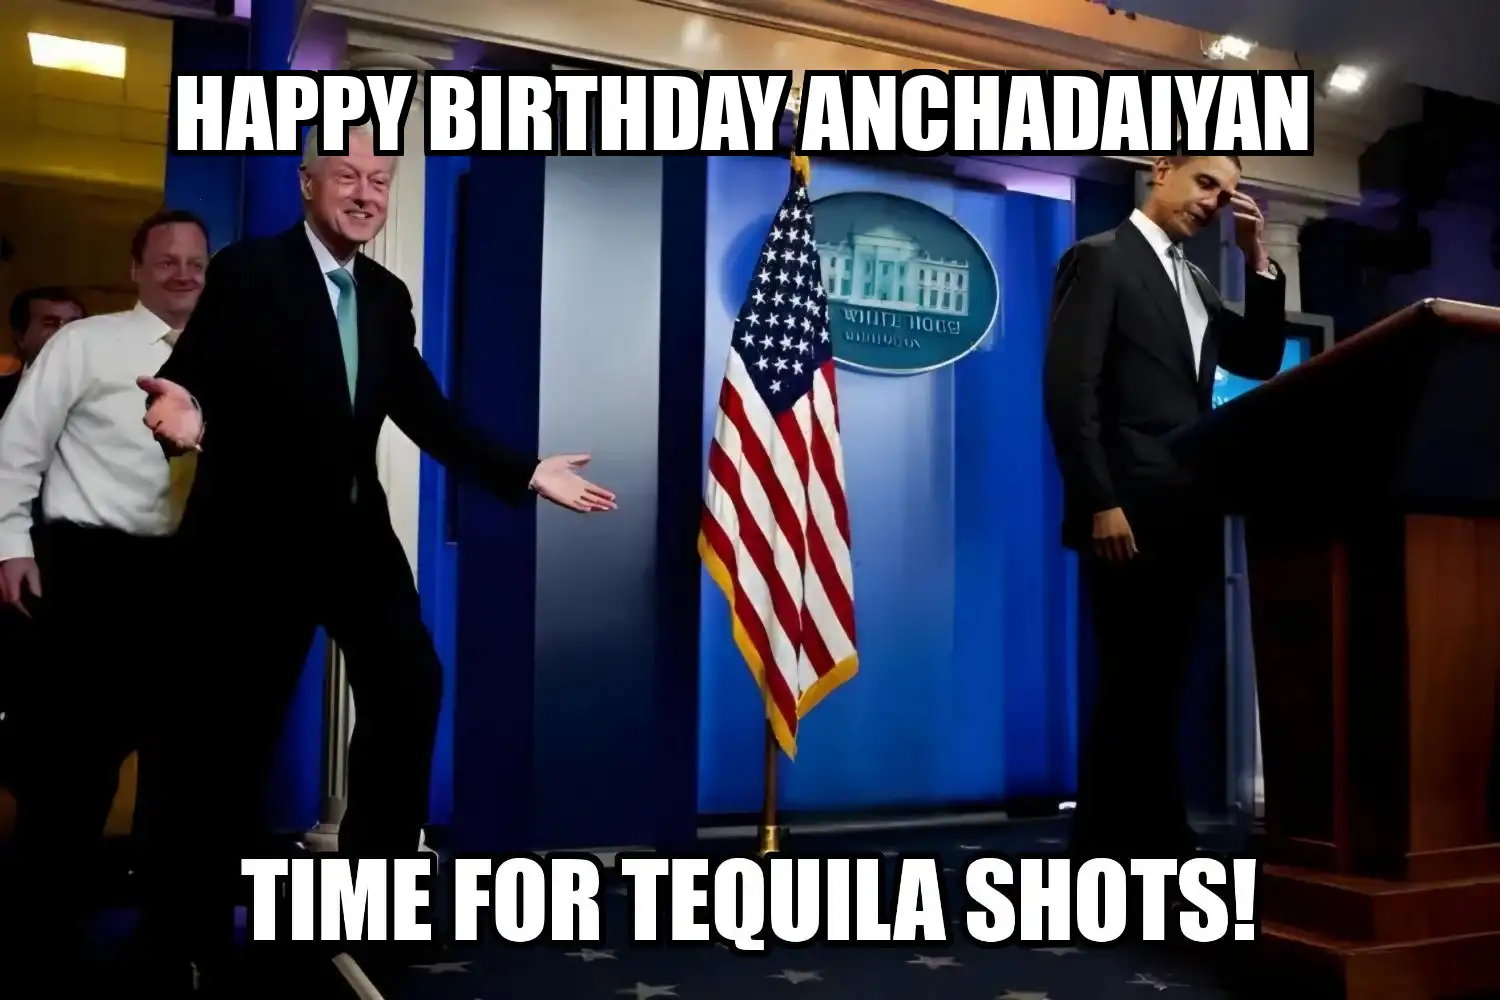 Happy Birthday Anchadaiyan Time For Tequila Shots Memes